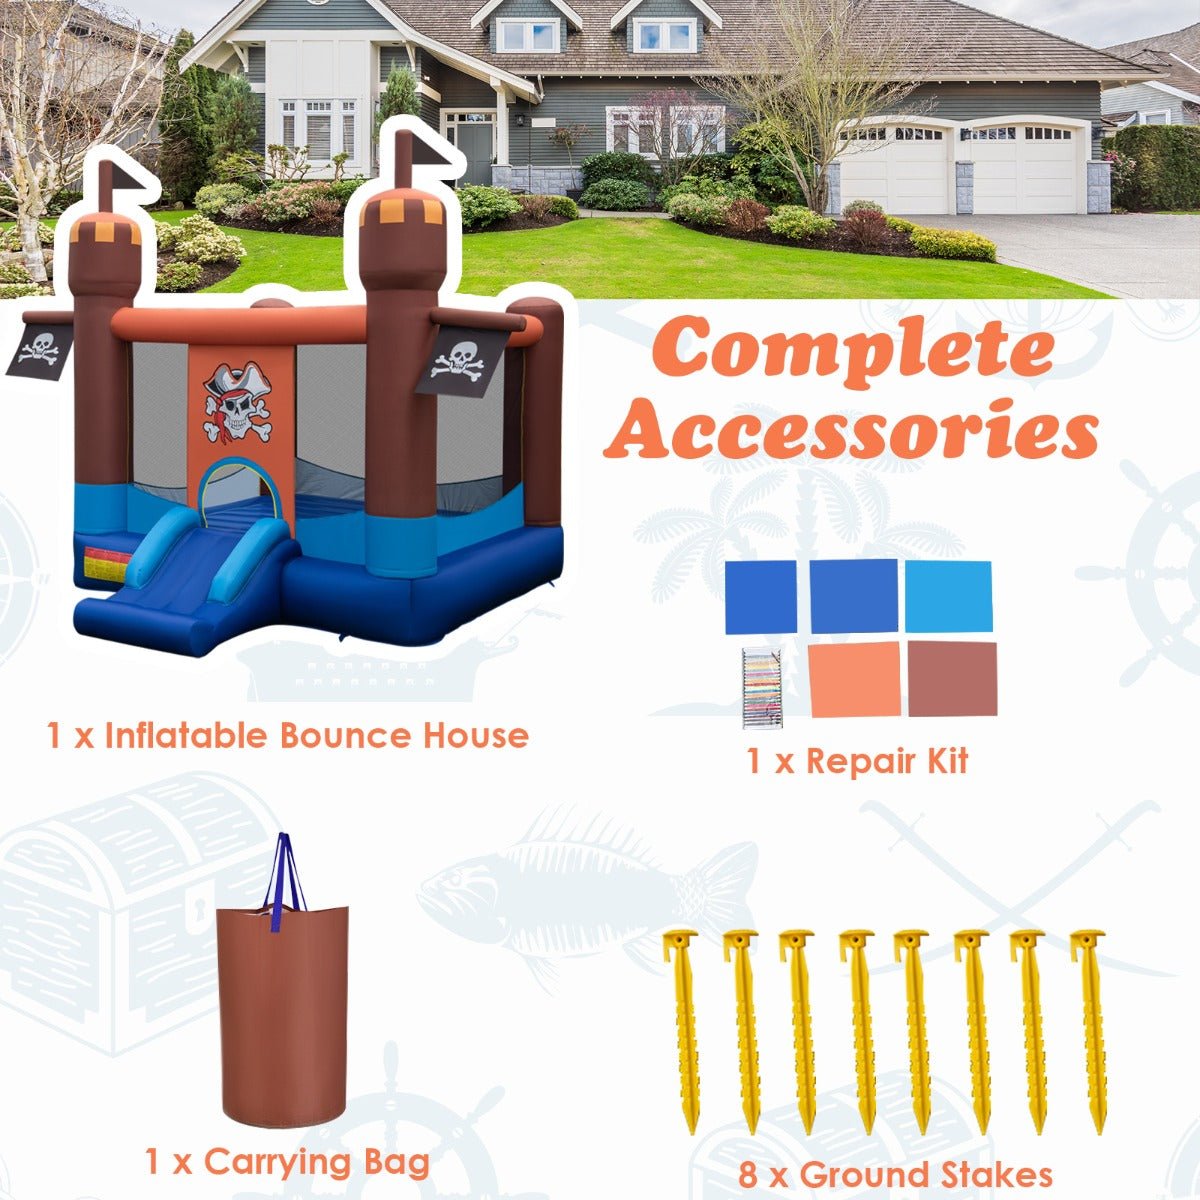 Inflatable Bounce House - Bounce Area and Basketball Hoop for Play